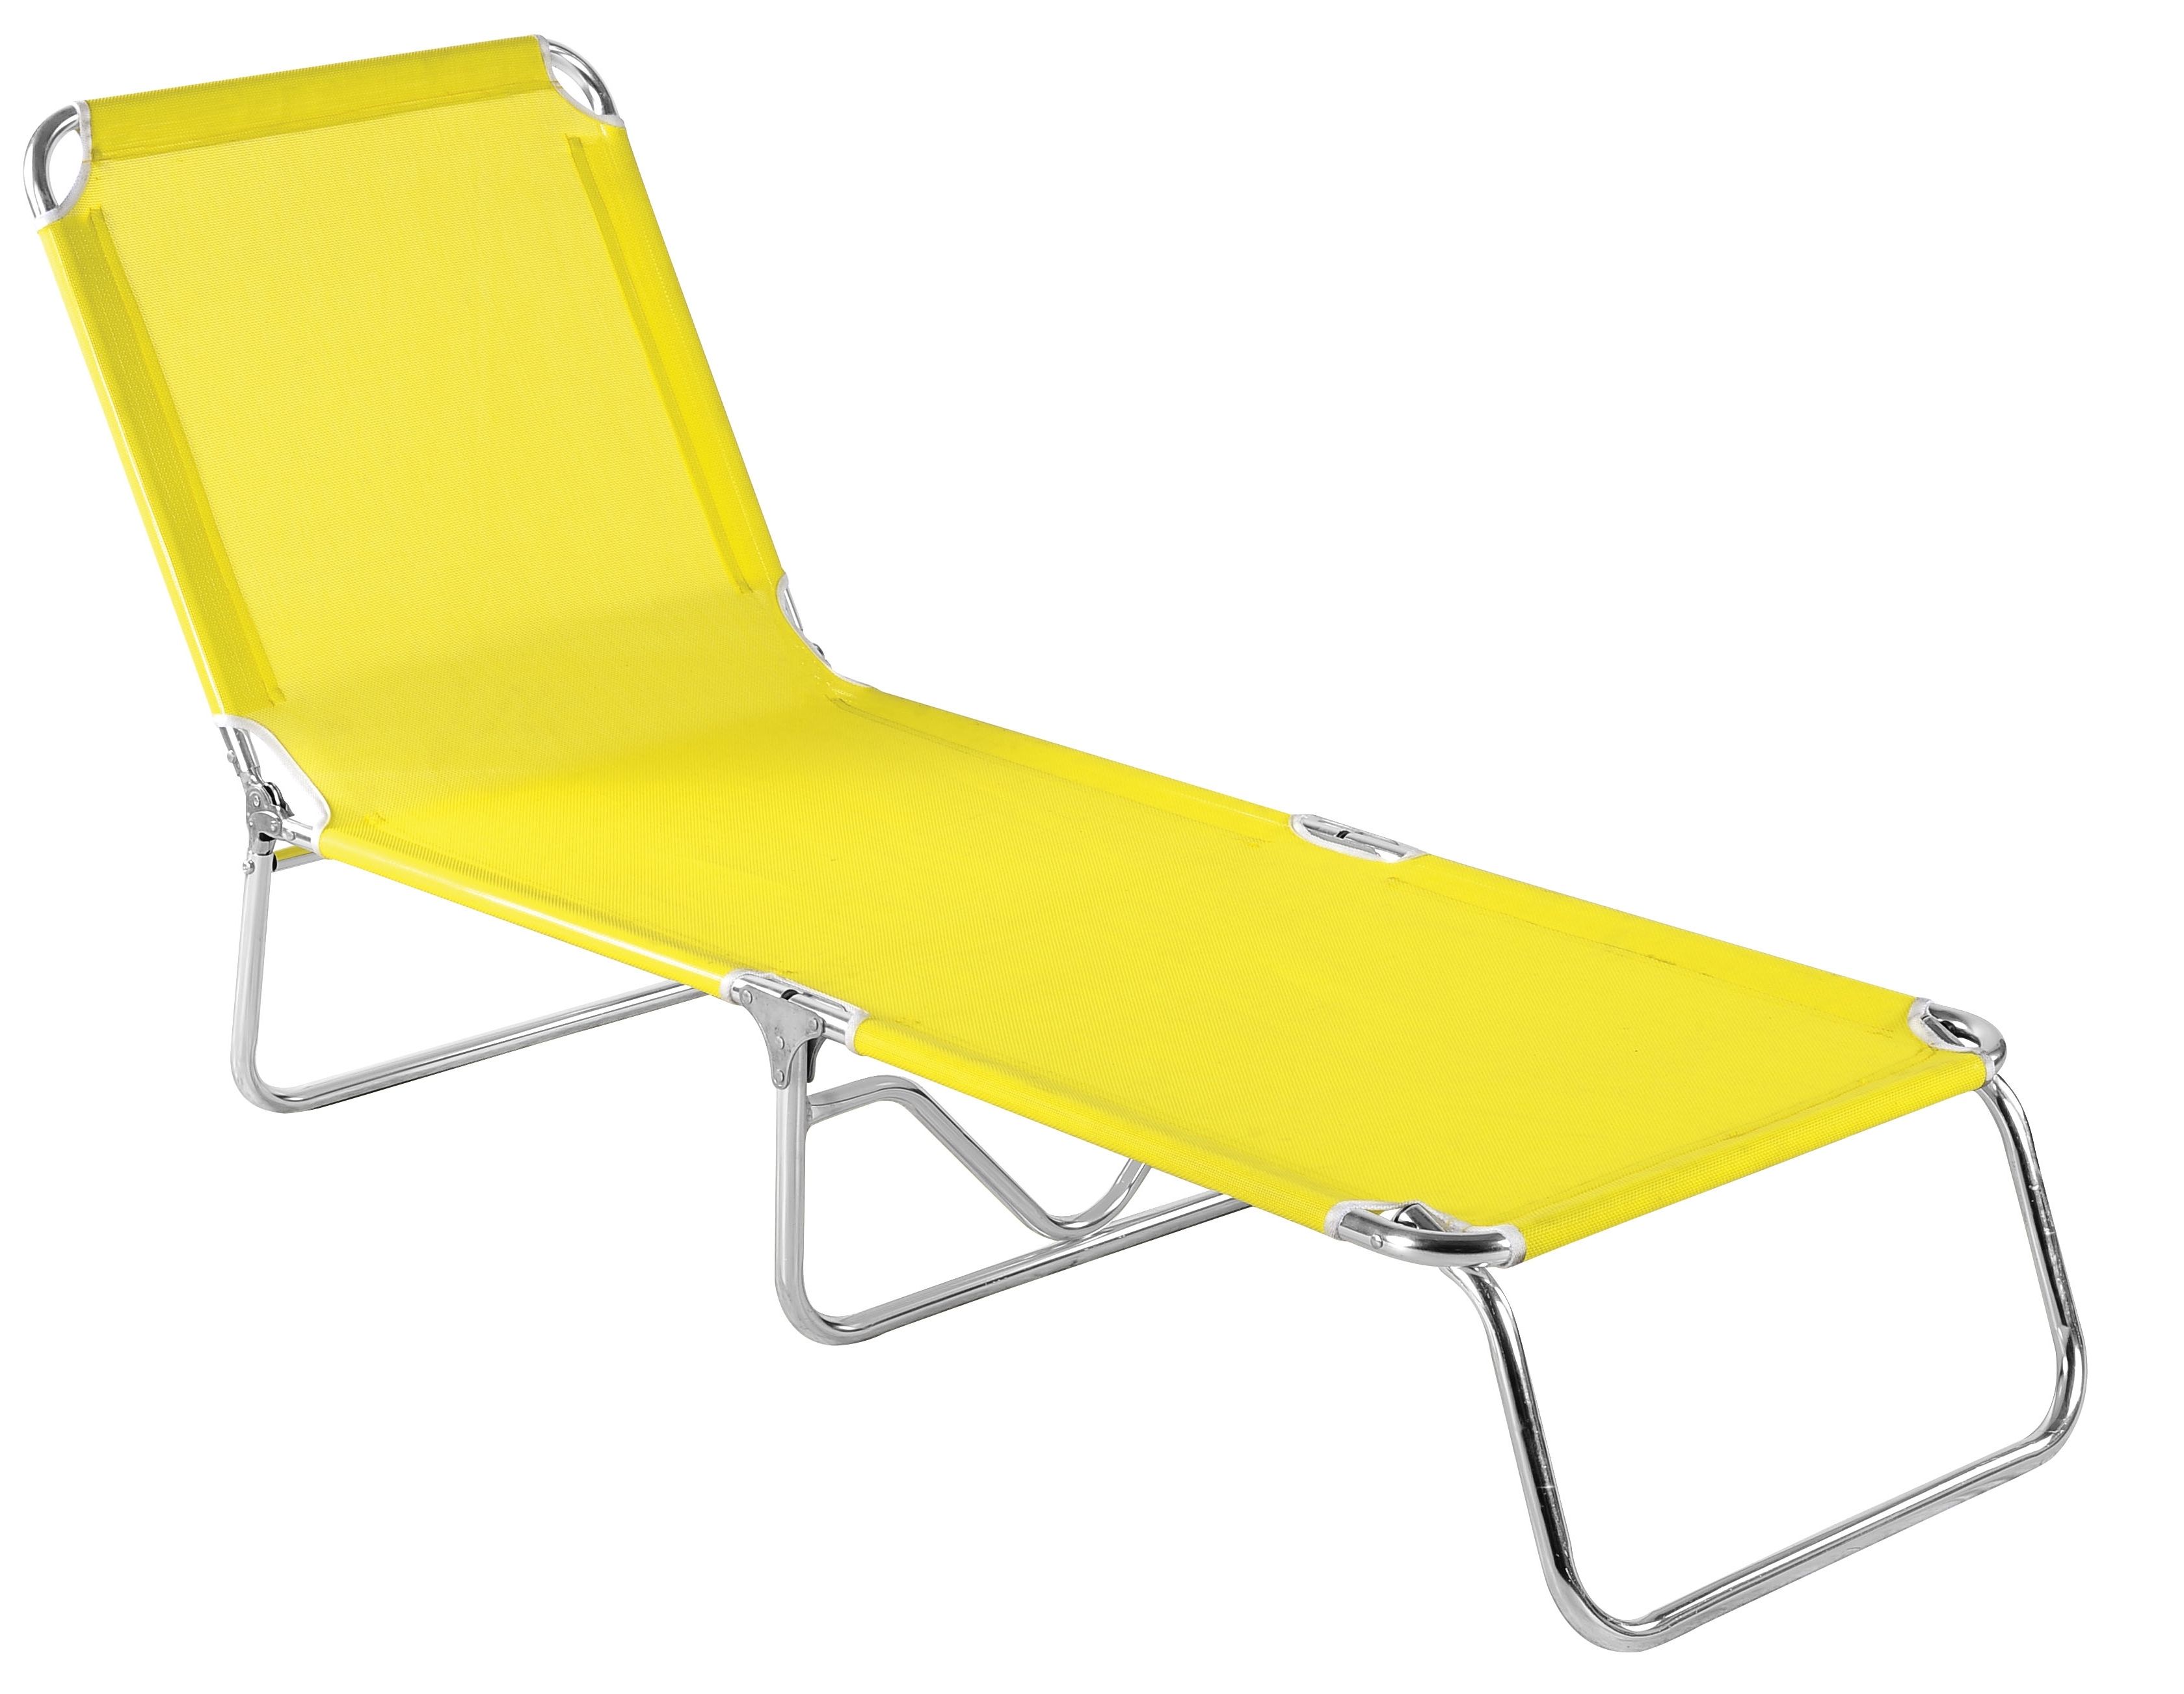 Chaise Lounge Beach Chairs Throughout Well Liked Jelly Beach Lounge Chair • Lounge Chairs Ideas (View 3 of 15)